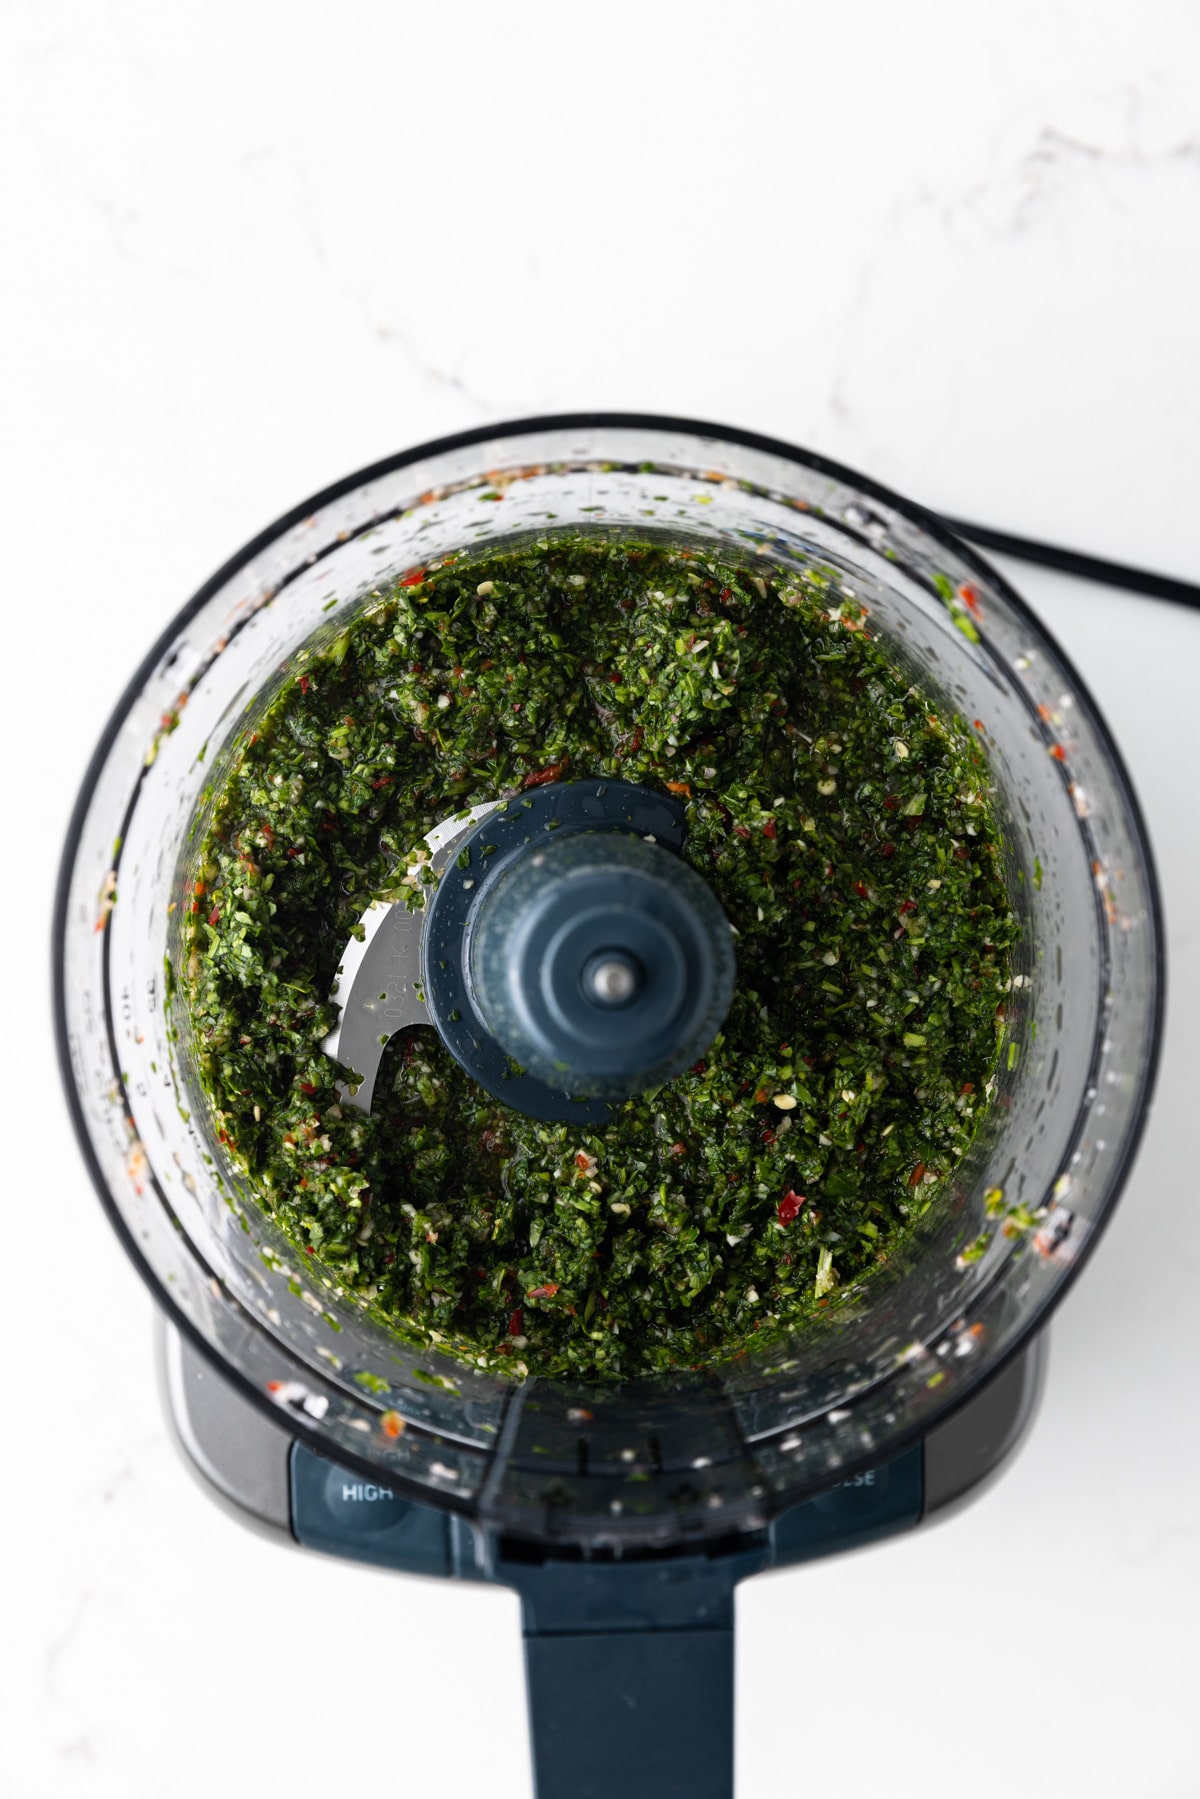 Blended chimichurri in food processor.